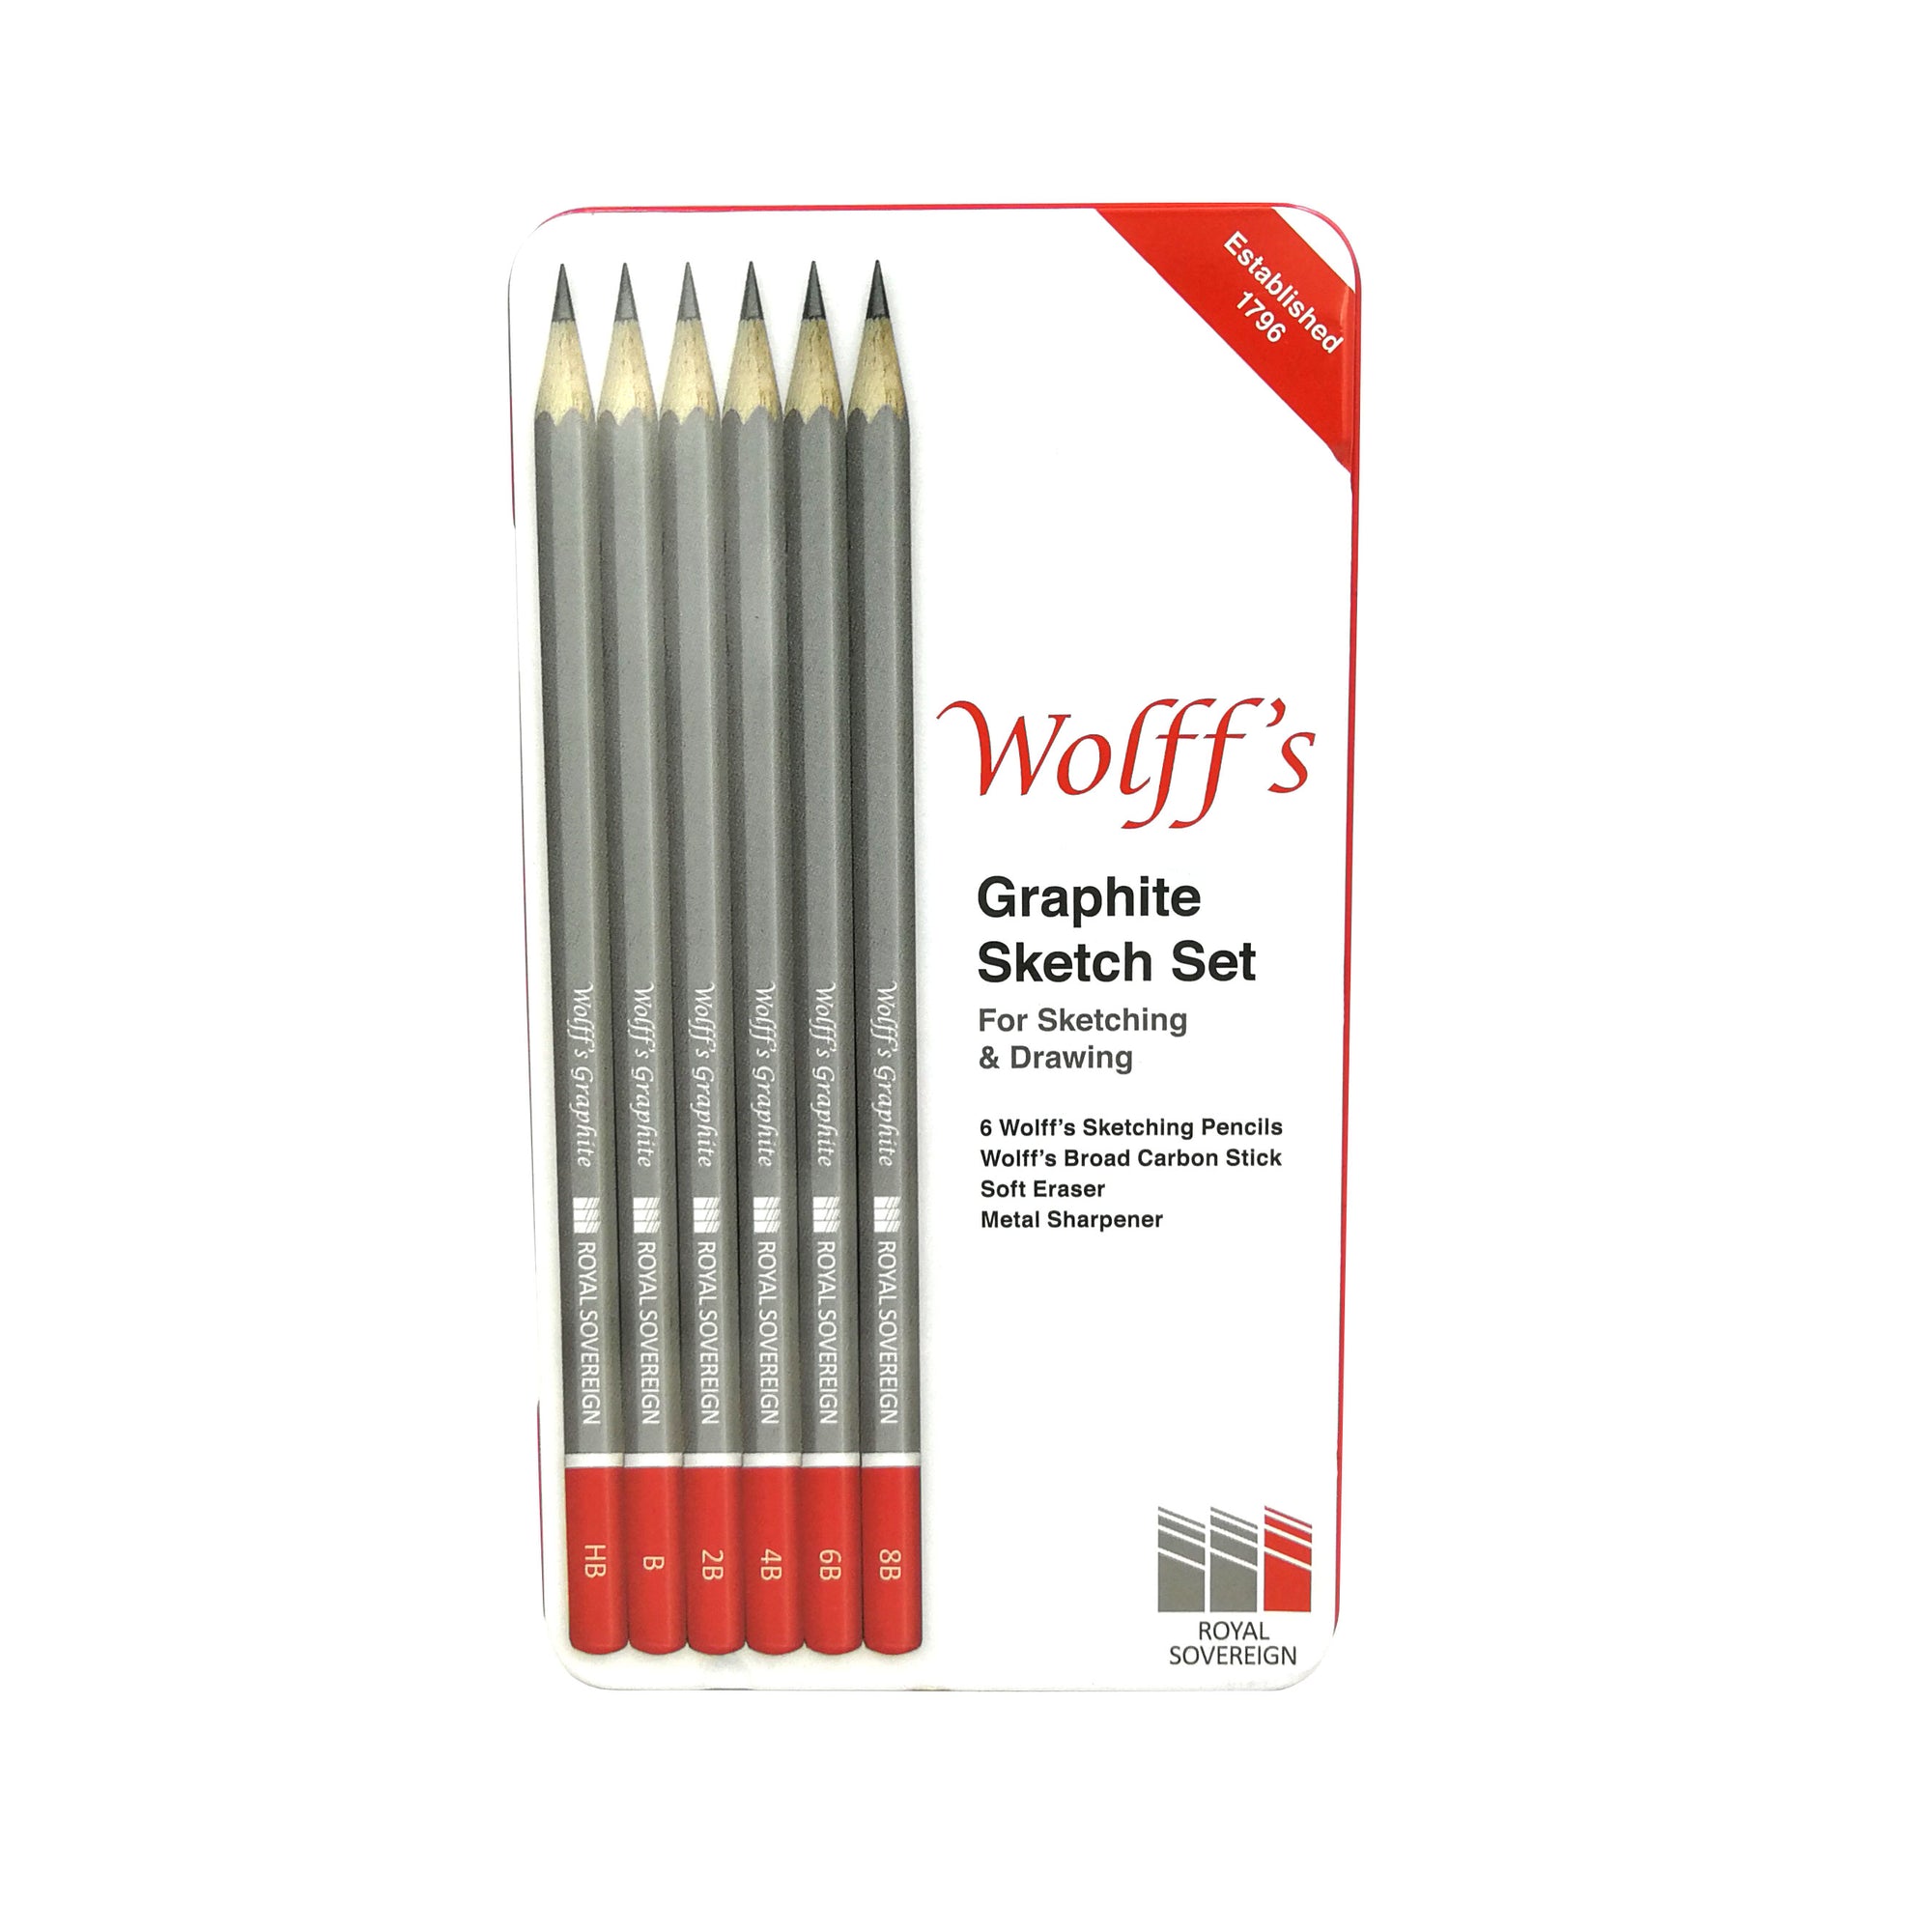 Castle Art Supplies 100 Piece Drawing & Sketching Set | Graphite, Charcoal, Pastel, Metallic & Water Soluble Pencils + Sticks, Fineliners | for